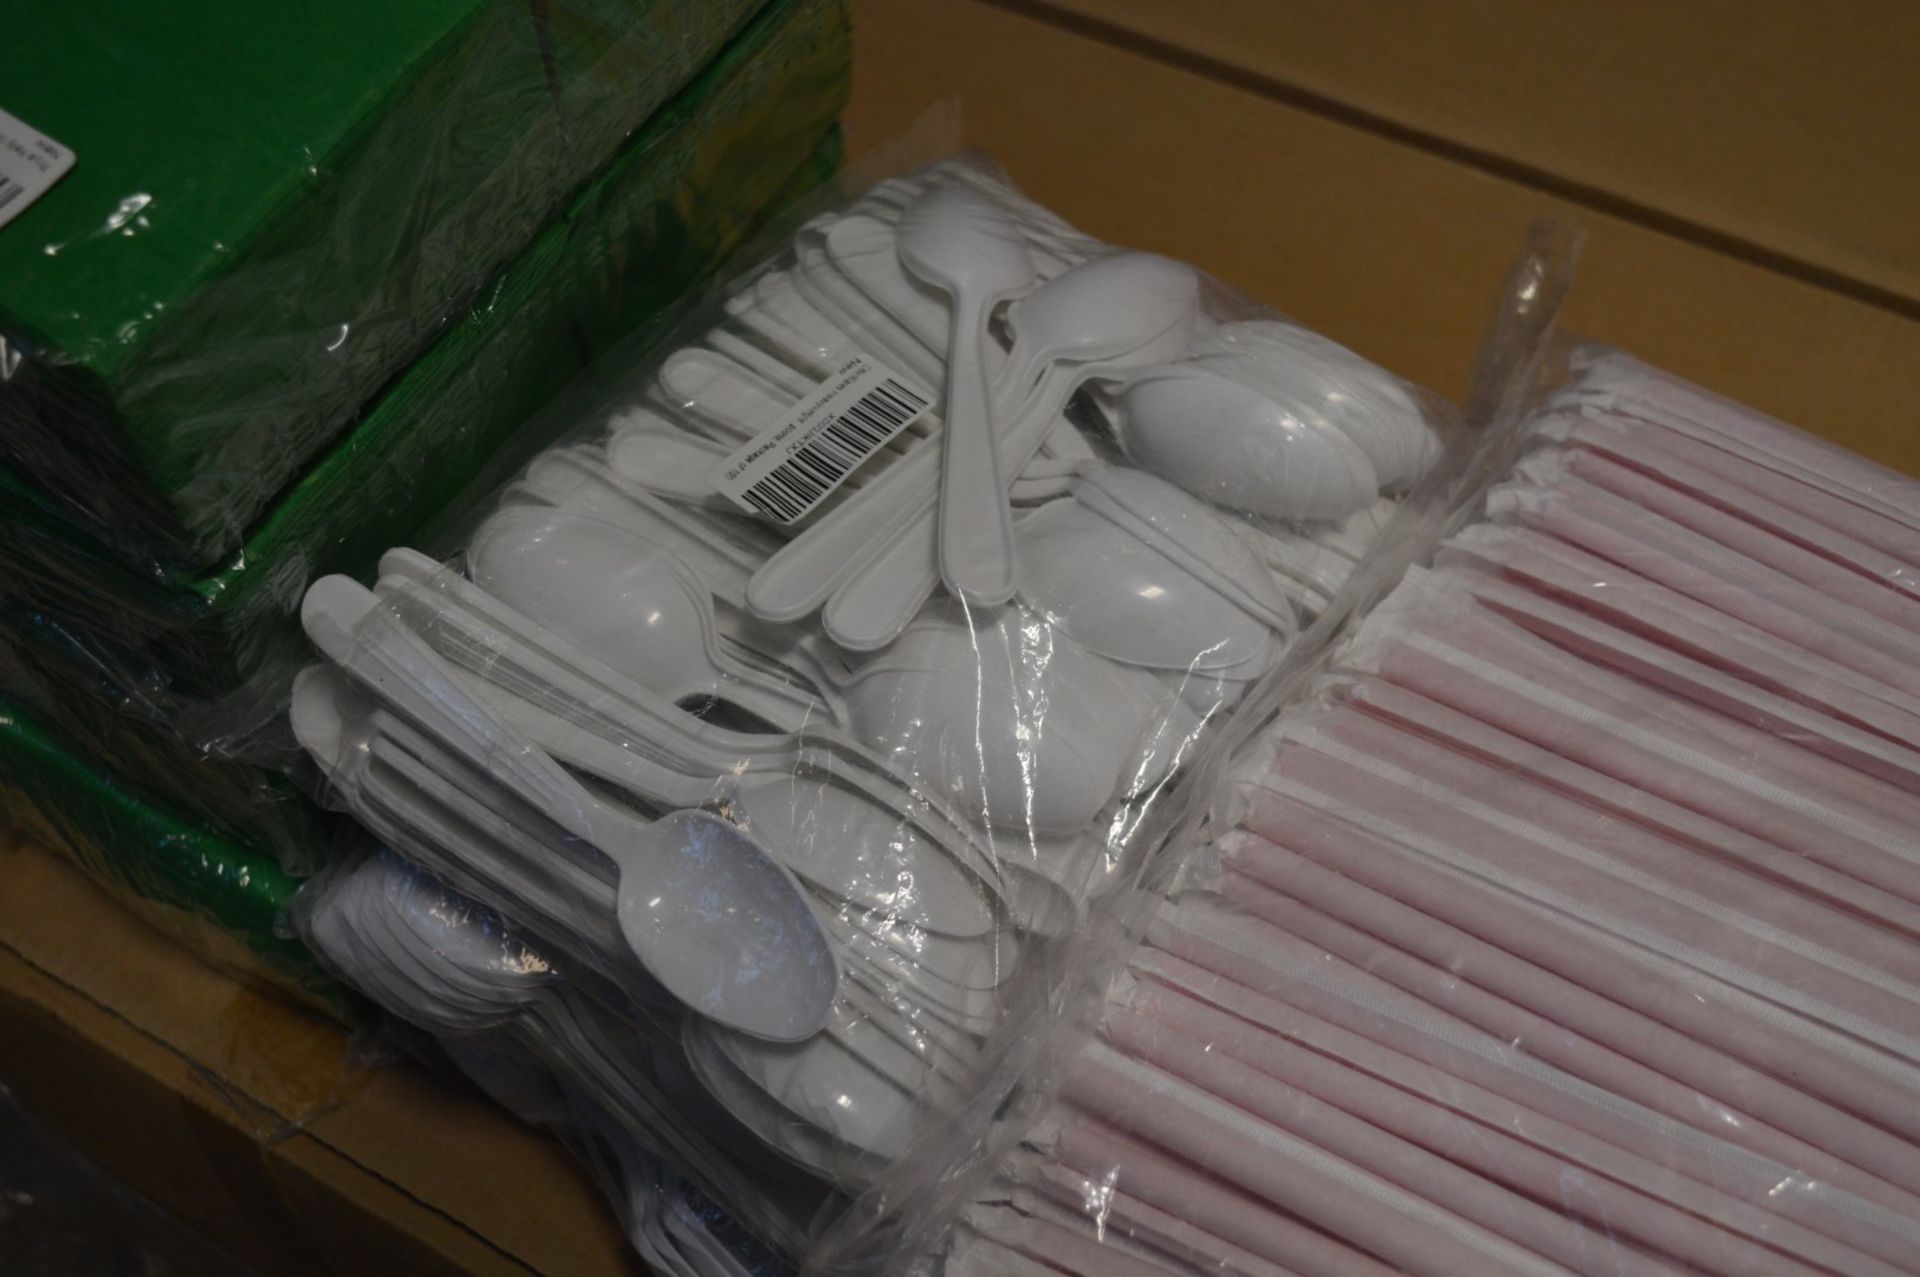 1 x Assorted Lot of Disposable Tableware - CL232 - Includes Spoons, Staws, Chopsticks and - Image 6 of 9